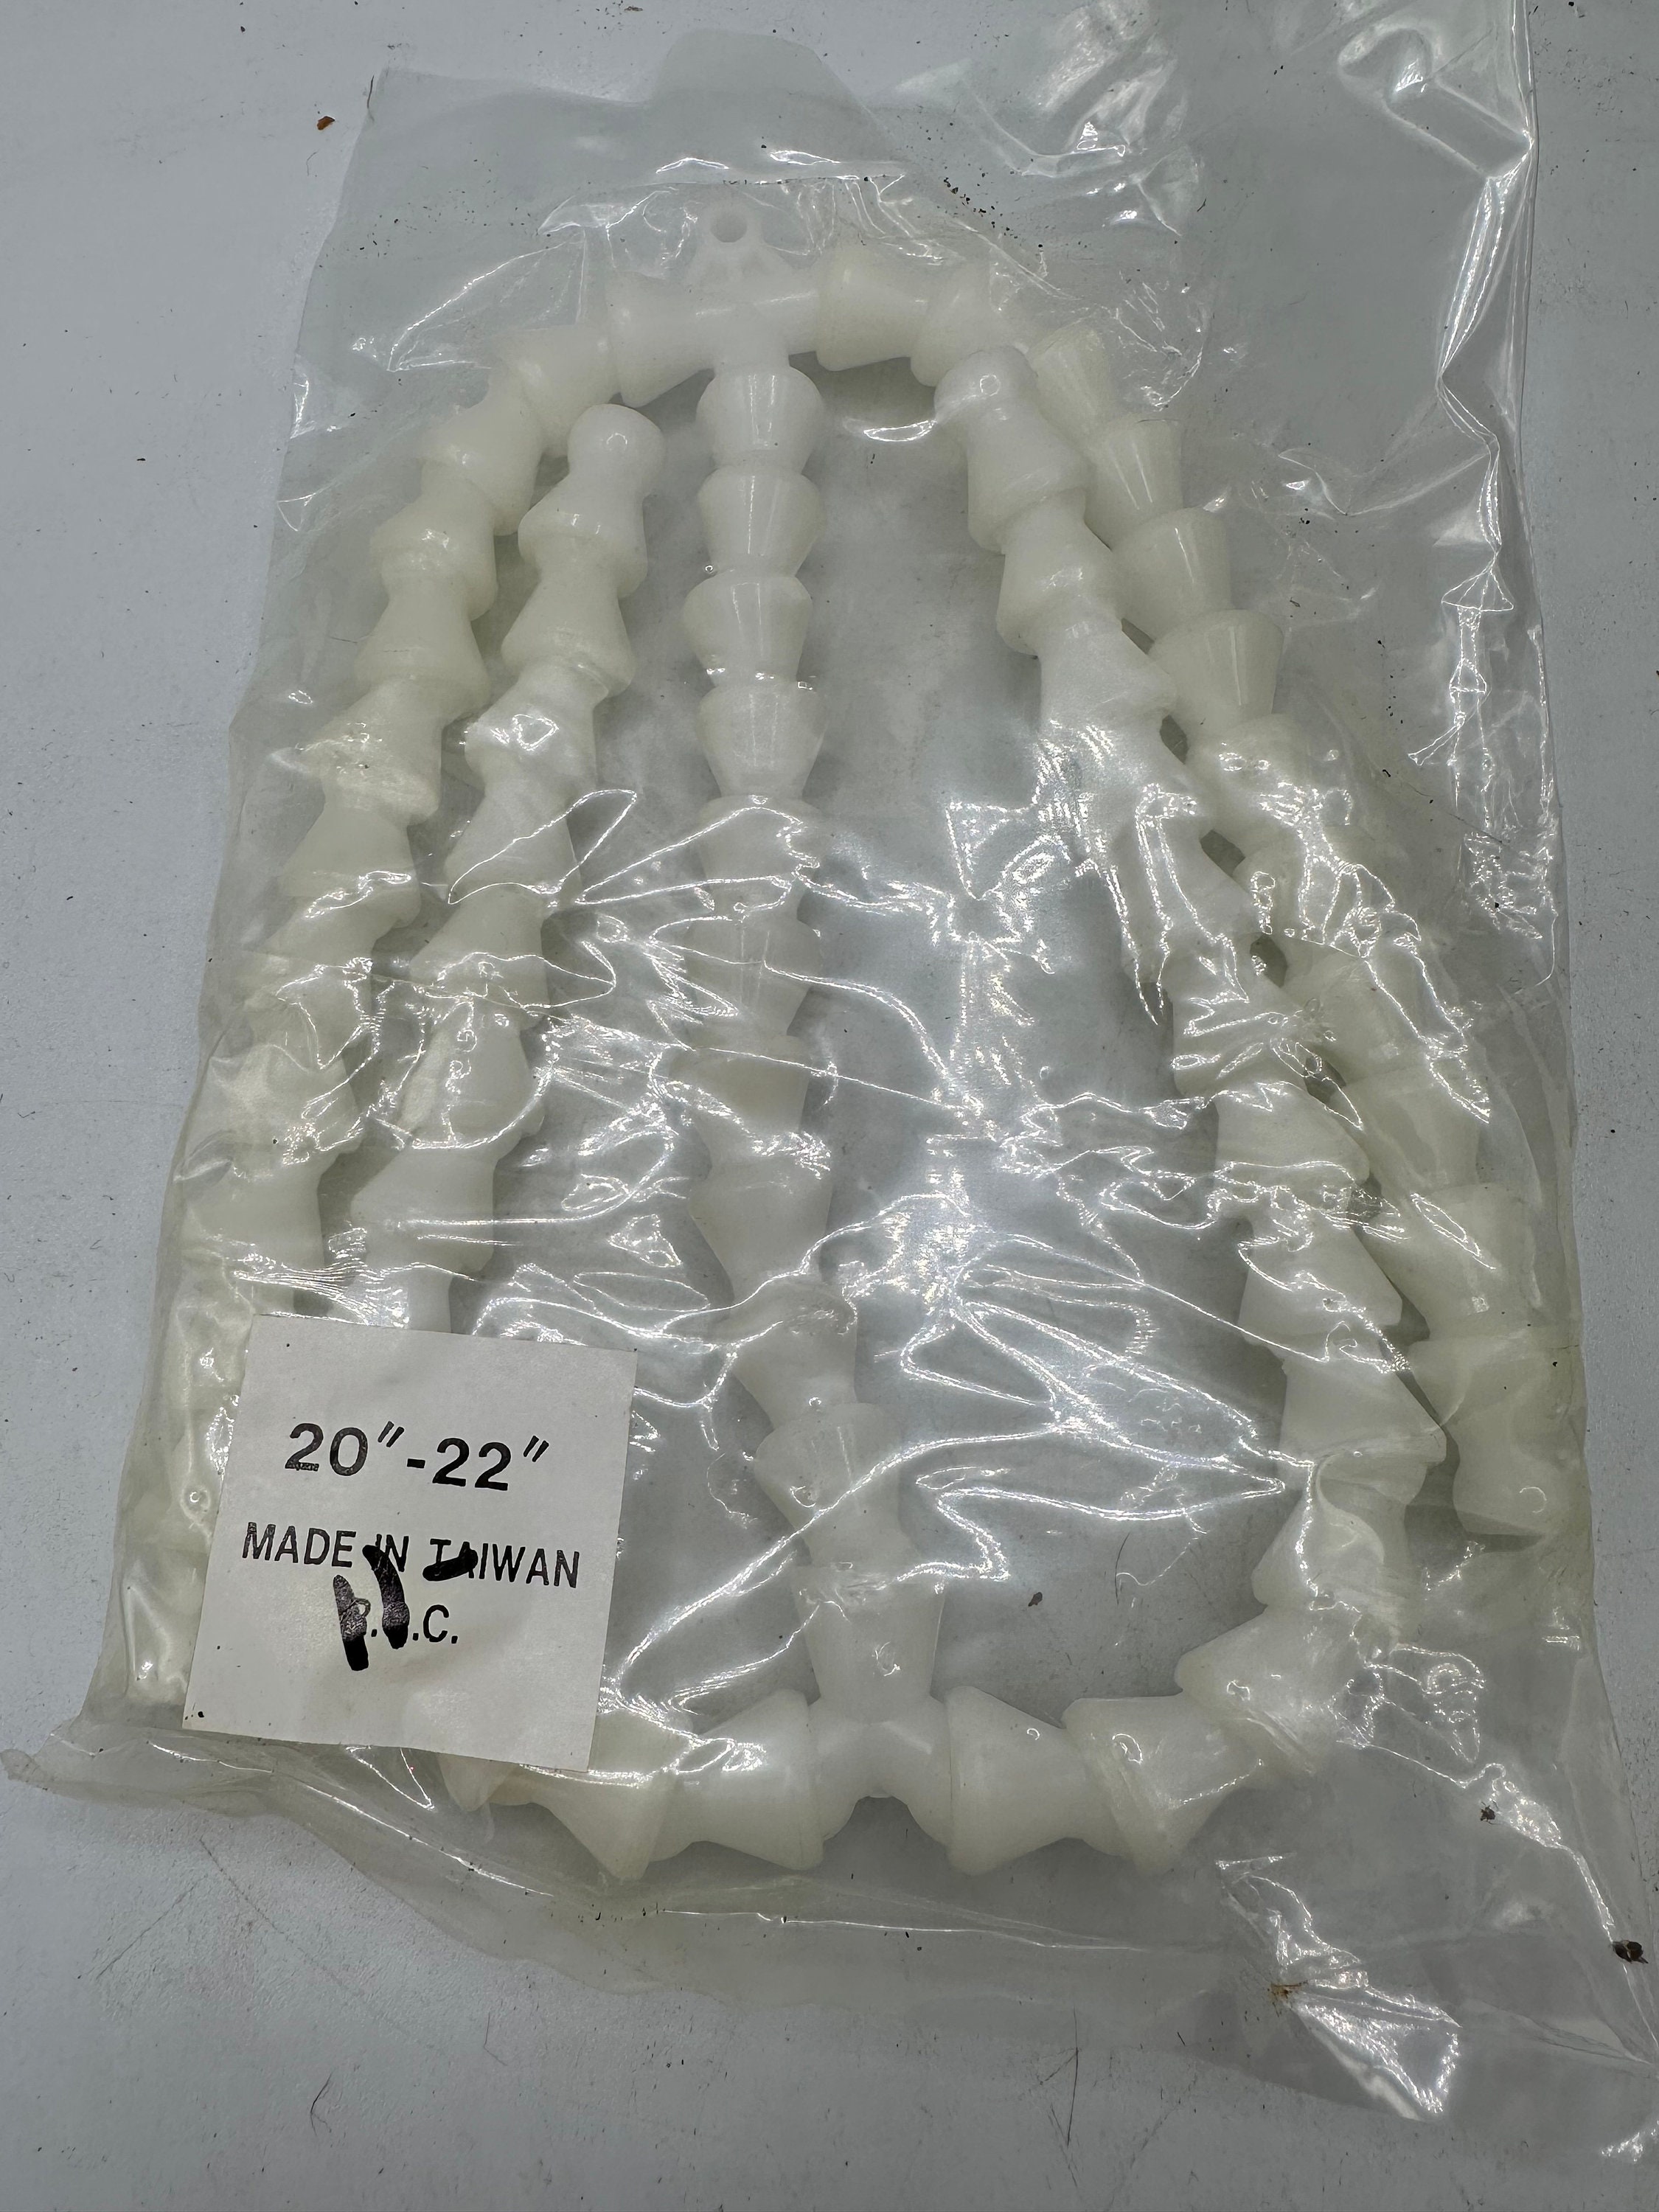 1/4 coil plastic ball and socket armature